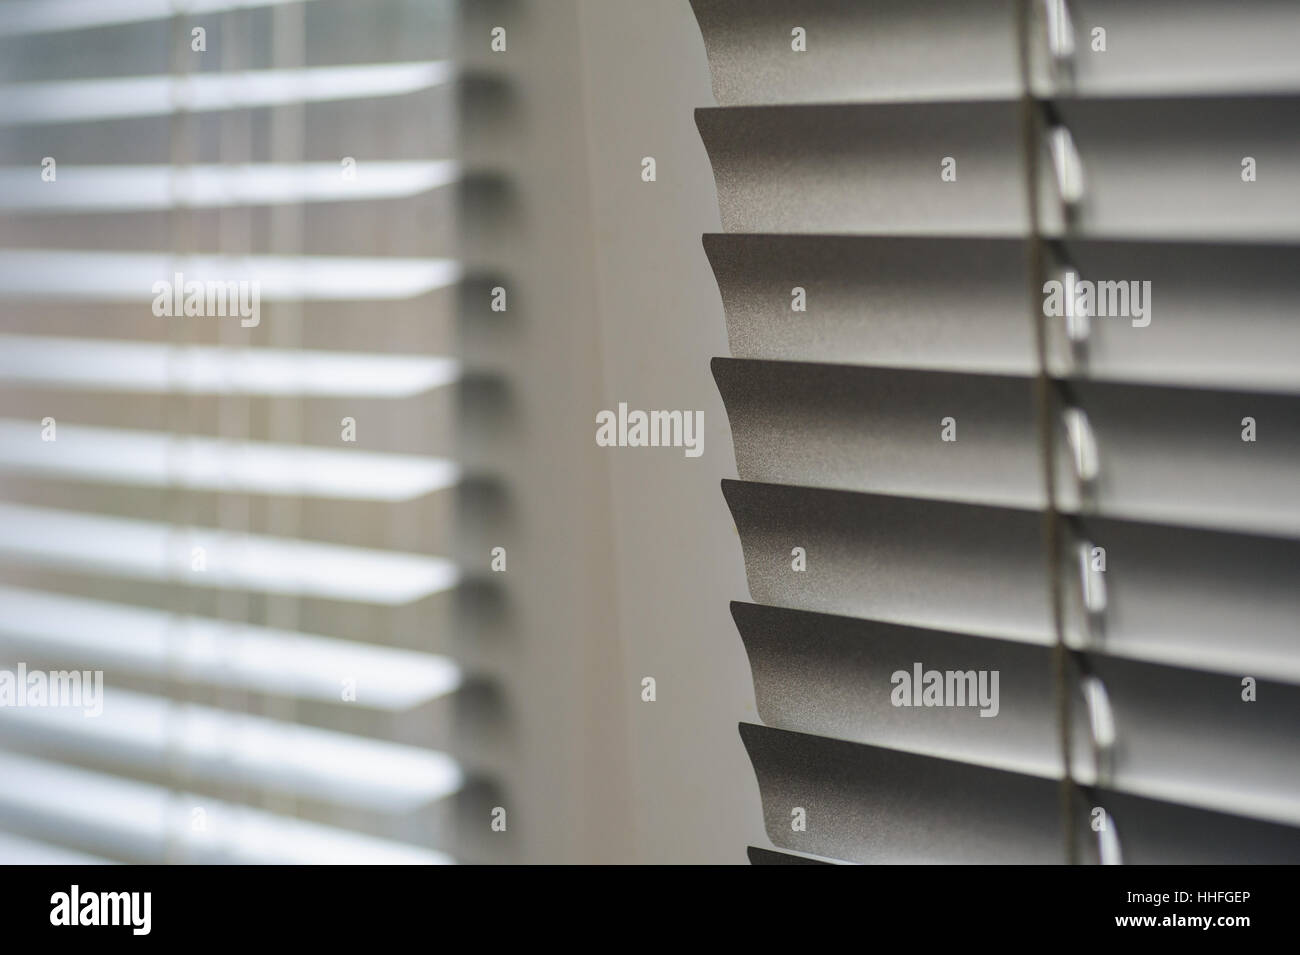 White shutters on the window in the Office Stock Photo